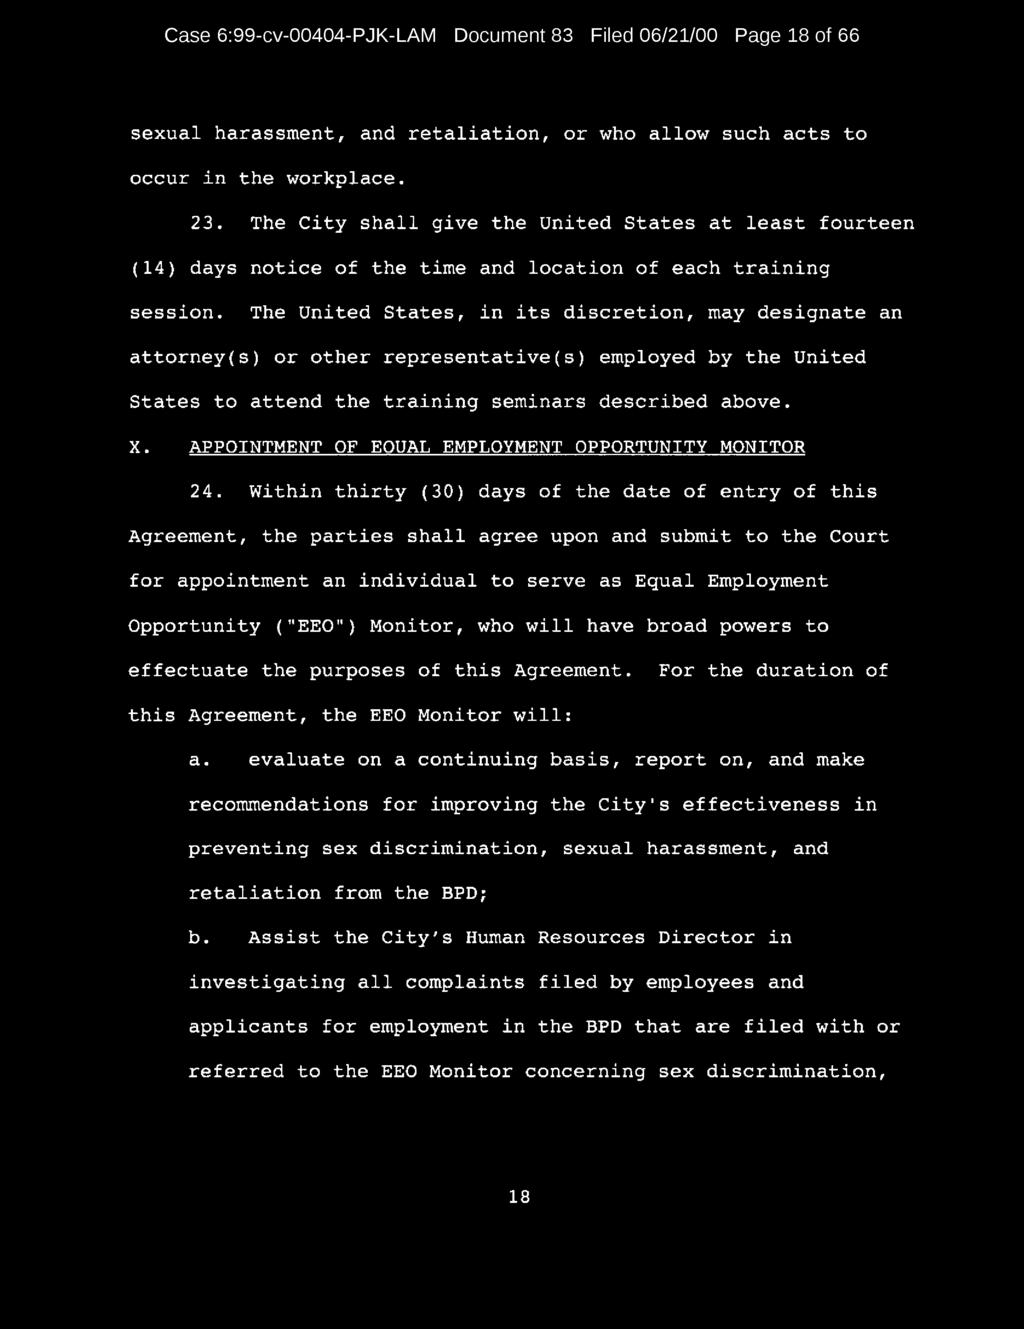 Case 6:99-cv-00404-PJK-LAM Document 83 Filed 06/21/00 Page 18 of 66 sexual harassment, and retaliation, or who allow such acts to occur in the workplace. 23.